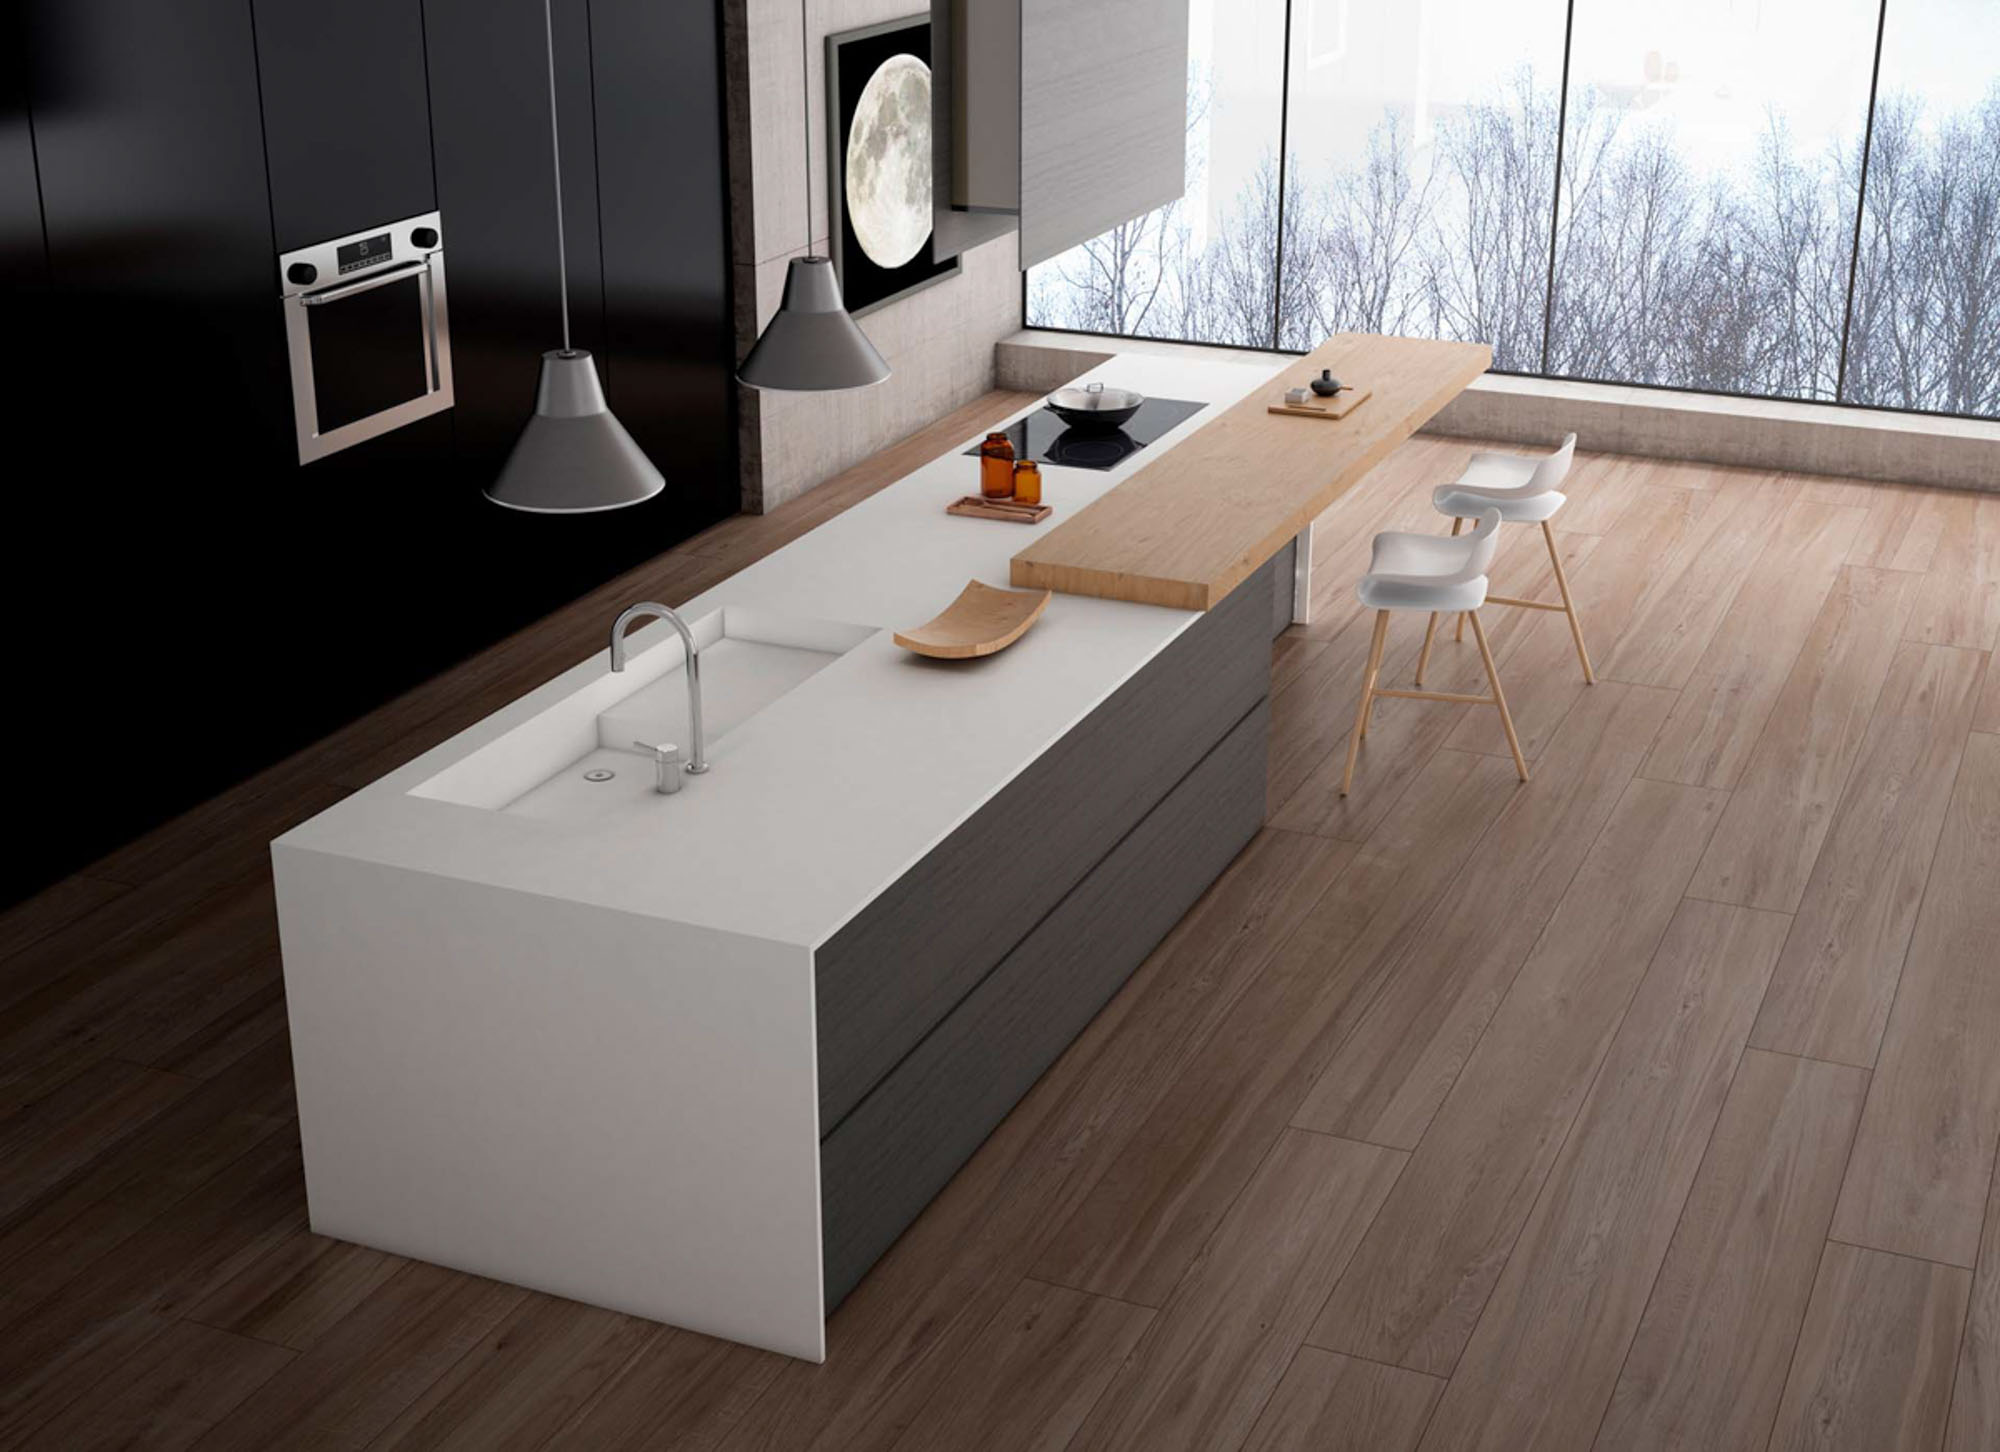 modern combined kitchen in white and wooden floor